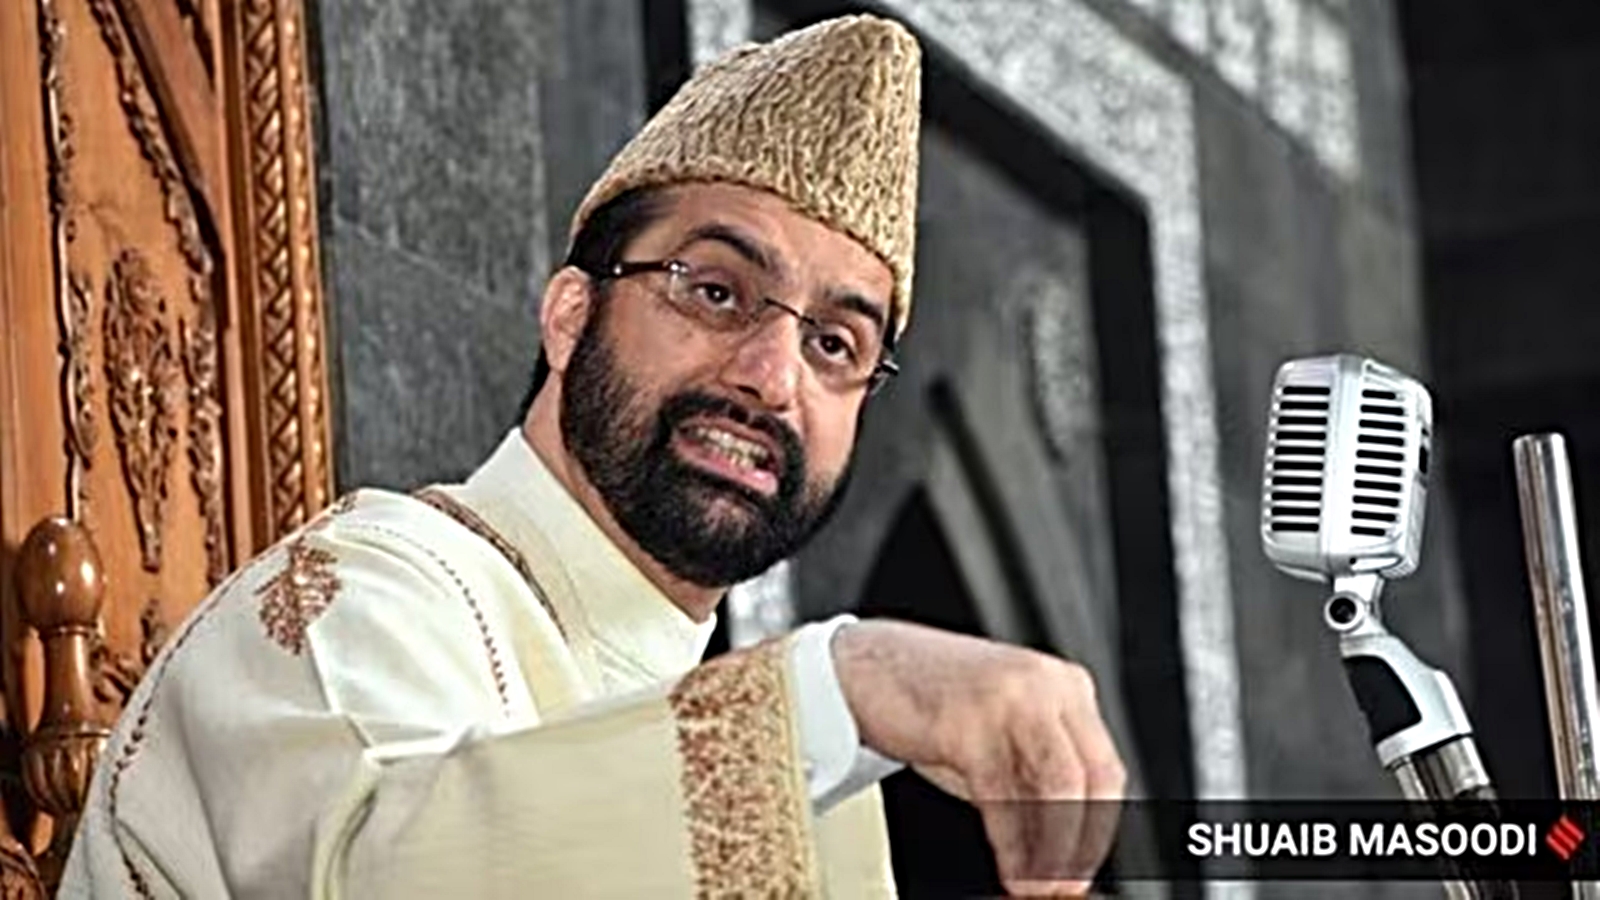 android, mirwaiz moves hc over not being allowed to lead prayers, j&k admin given ‘last opportunity’ to respond